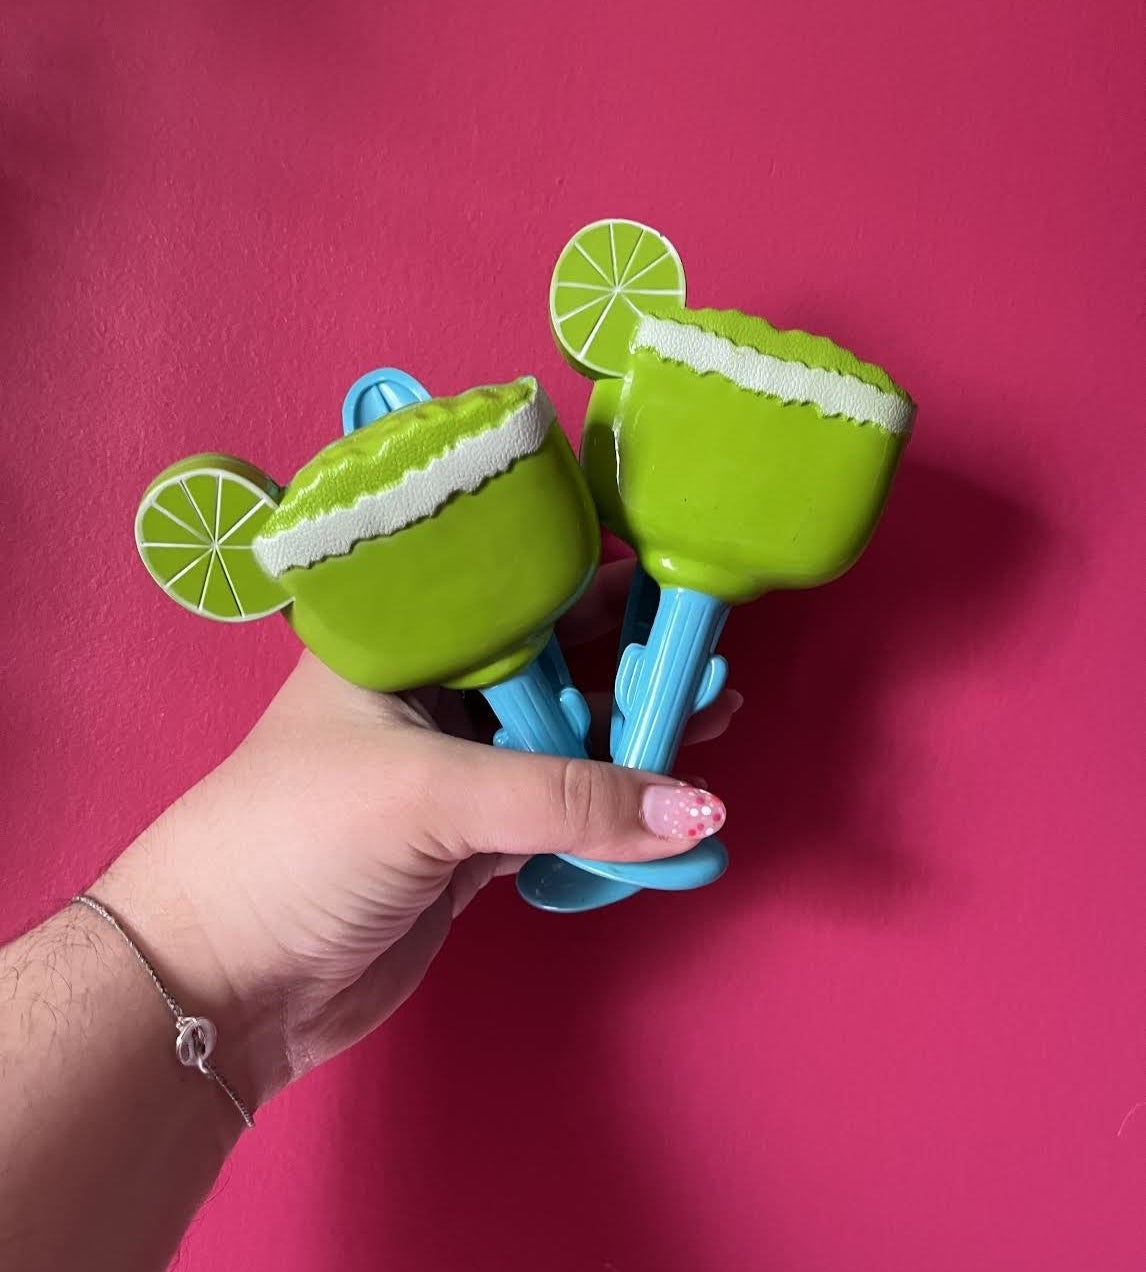 Bianca holding up the margarita shaped clips against a plain wall